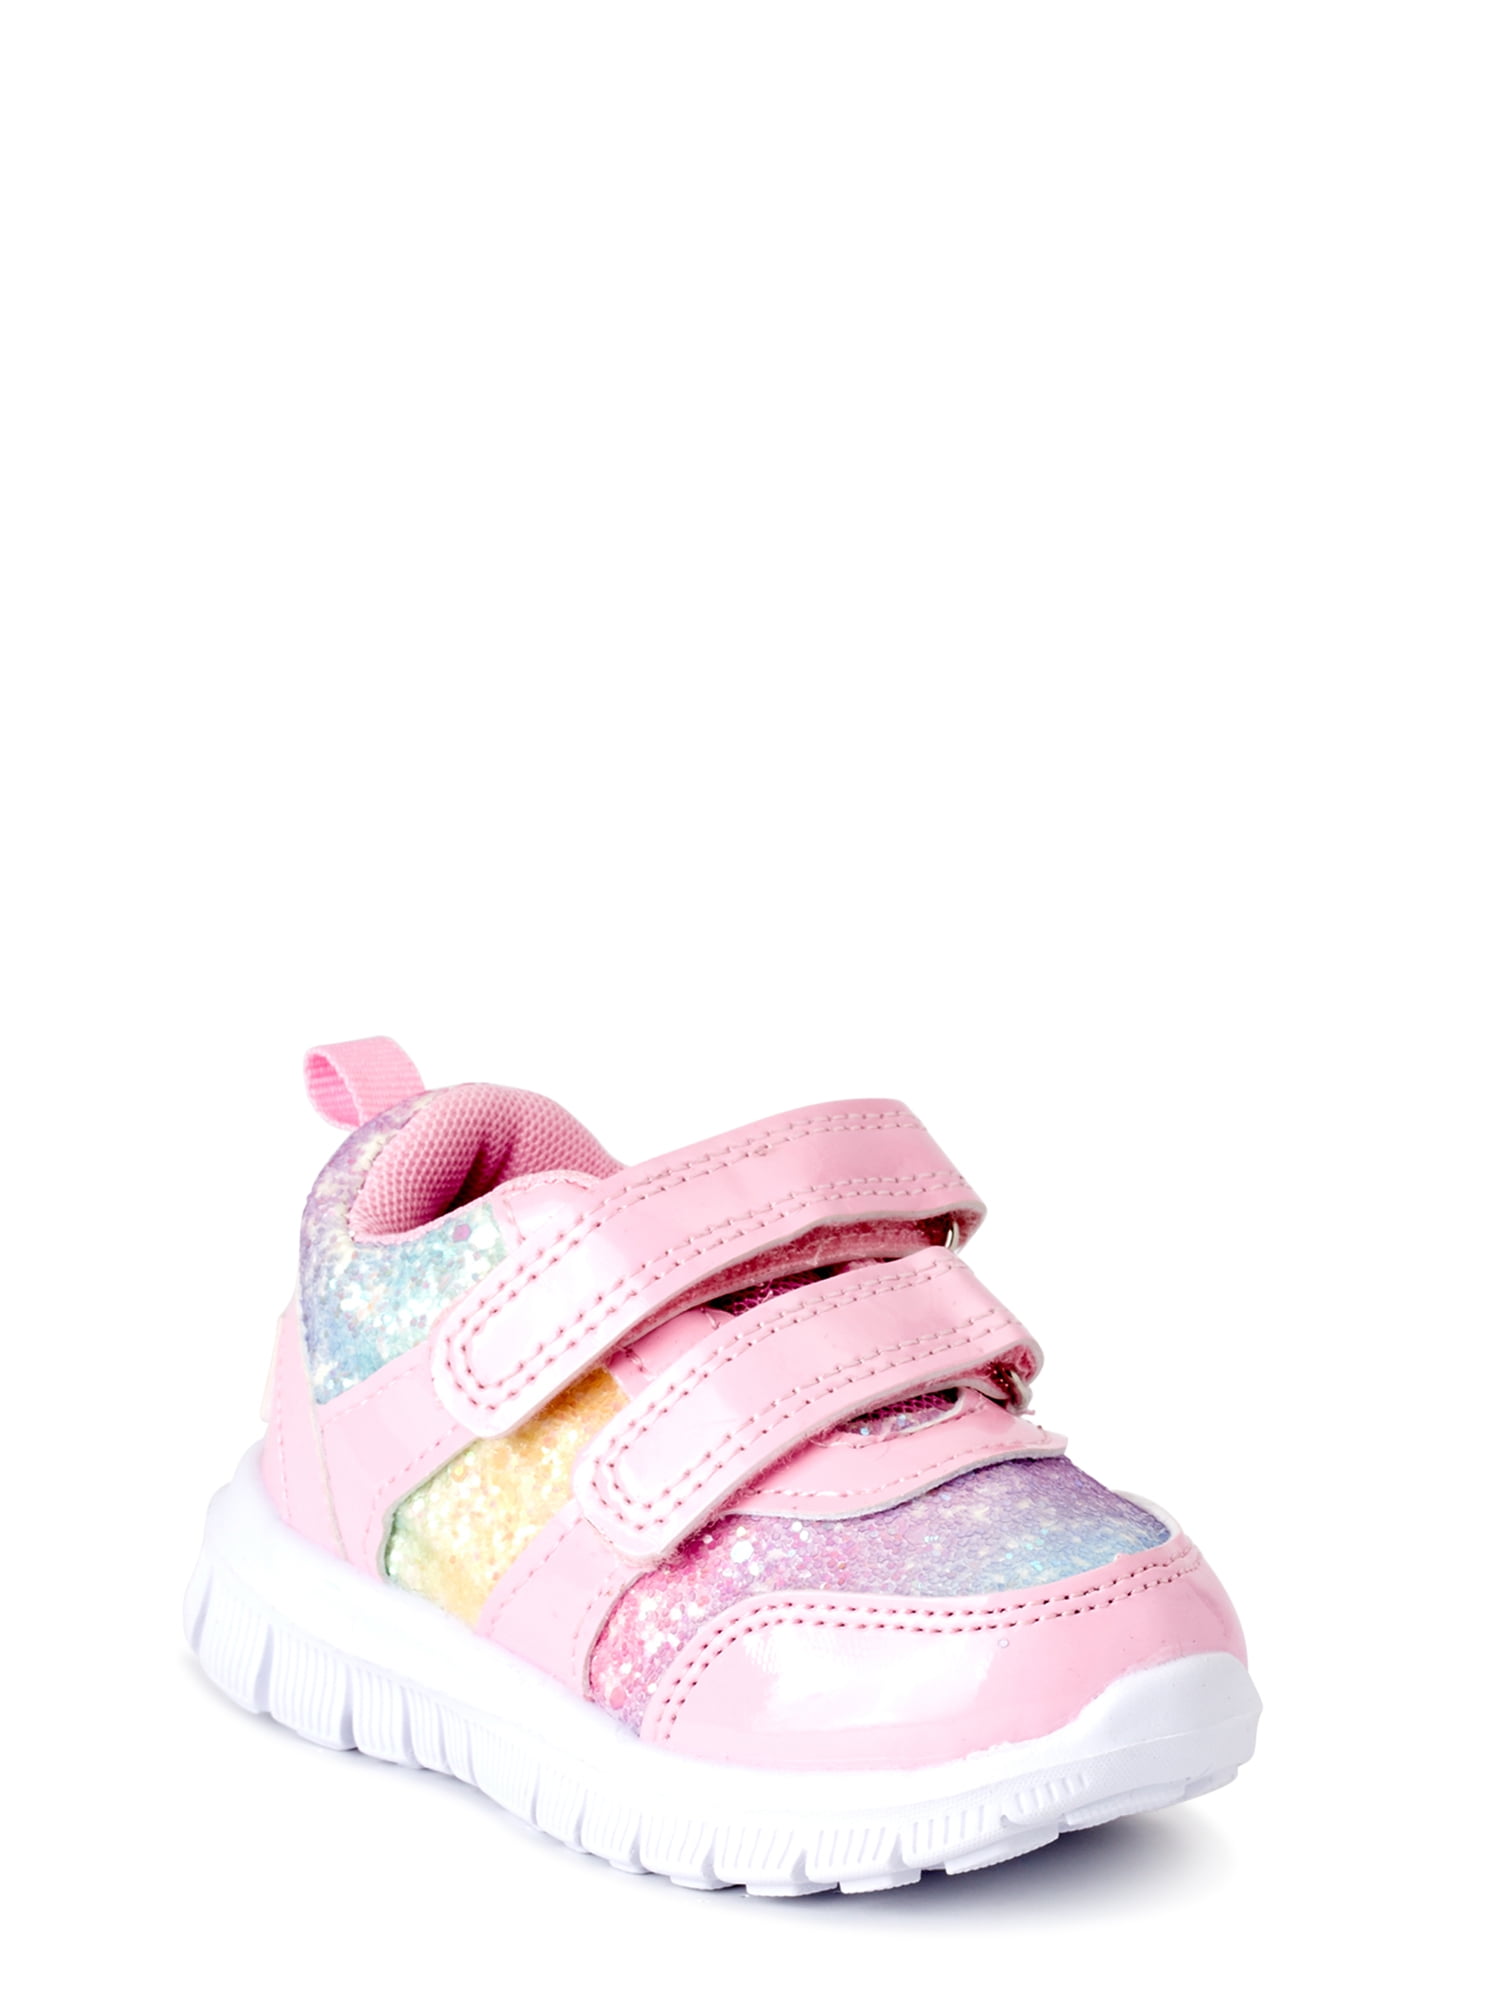 infant girl size 4 sneakers